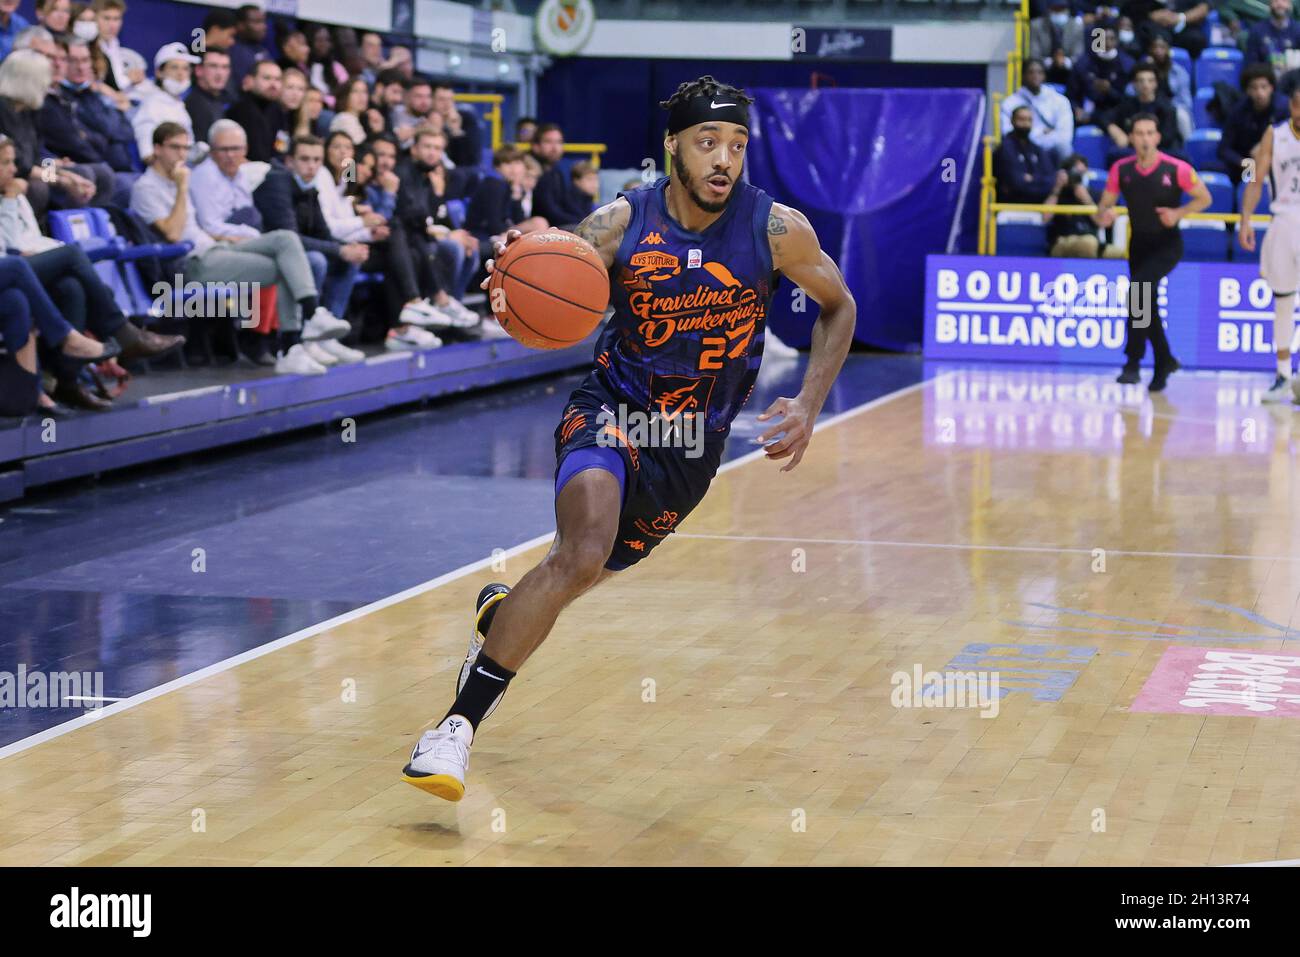 Levallois, France. 15th Oct, 2021. Marcquise REED (2) of BCM Gravelines  during the French championship, Betclic Elite Basketball match between  Metropolitans 92 and BCM Gravelines-Dunkerque on October 15, 2021 at Palais  des